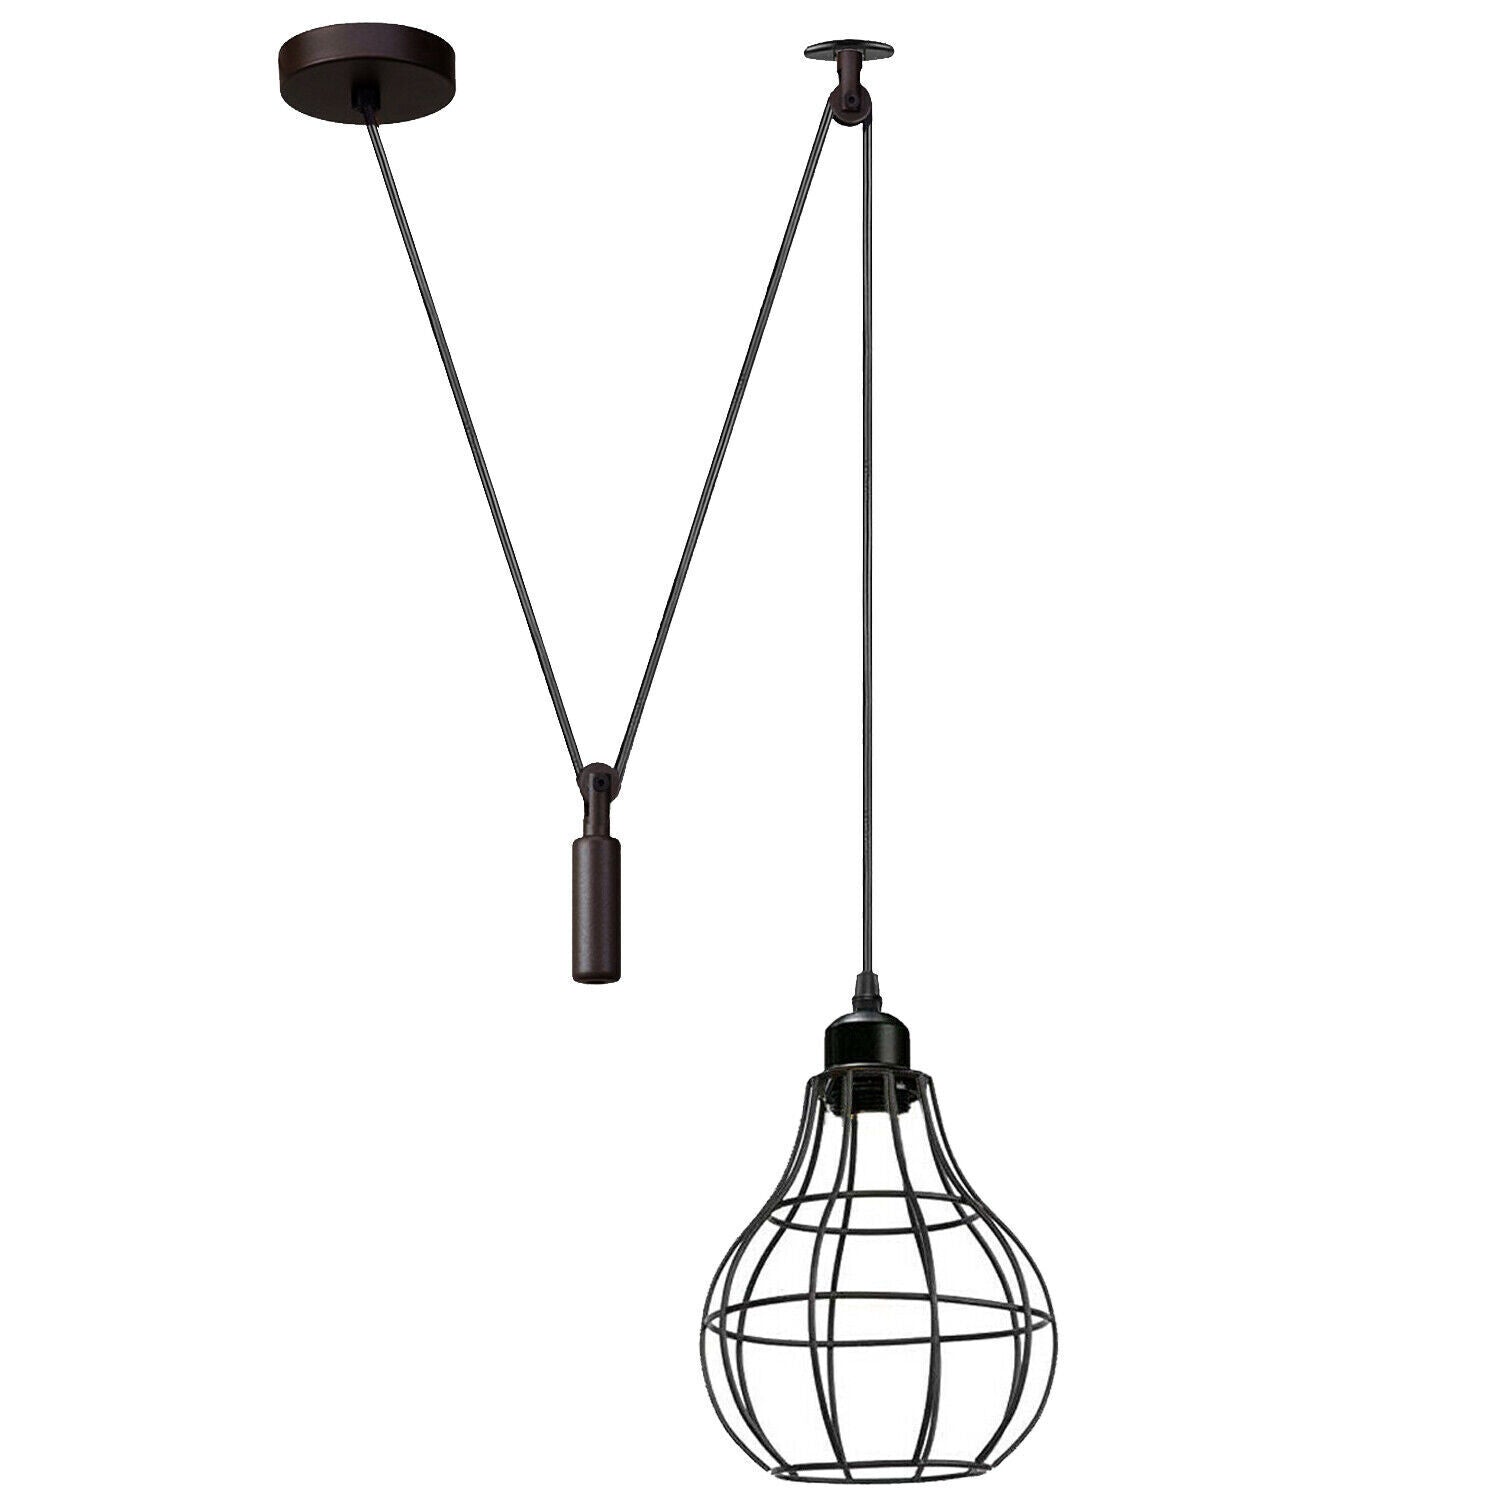 Spider Pendant Spider Lights For Cafe & Restaurant Any room cages shades 